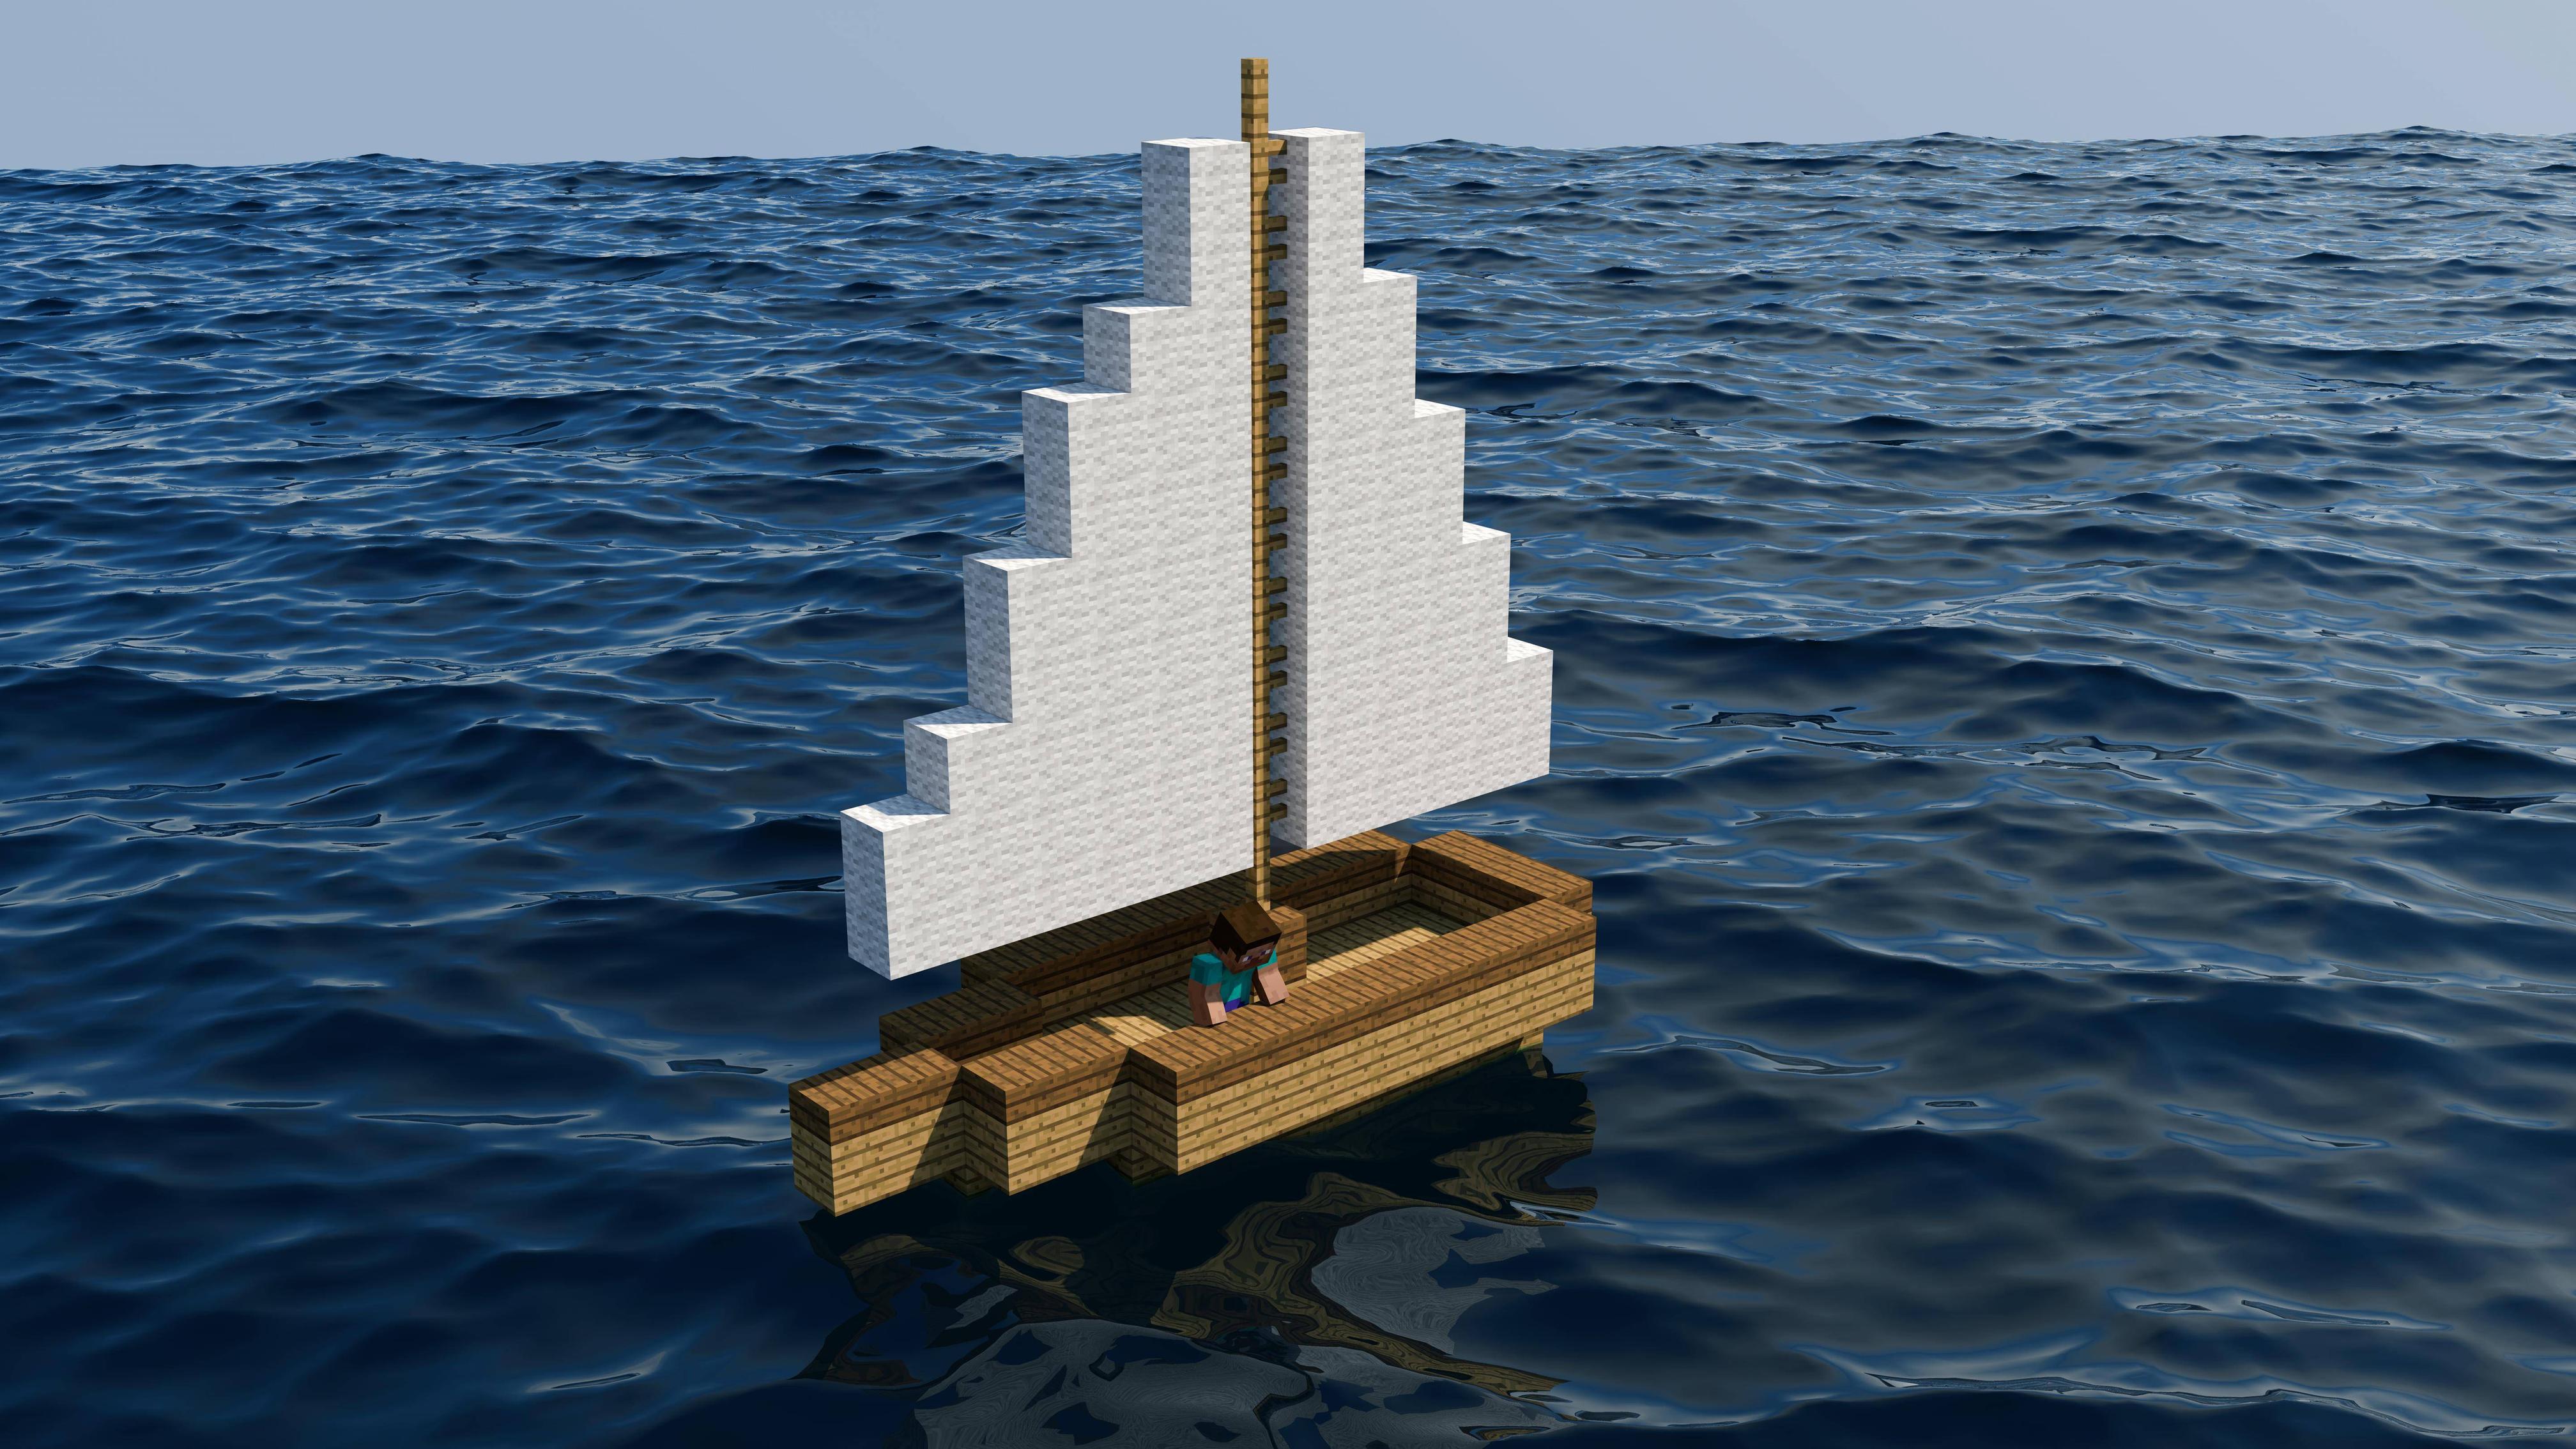 PC Gaming Video Games Video Game Art Boat Sea Minecraft Steve 4032x2268